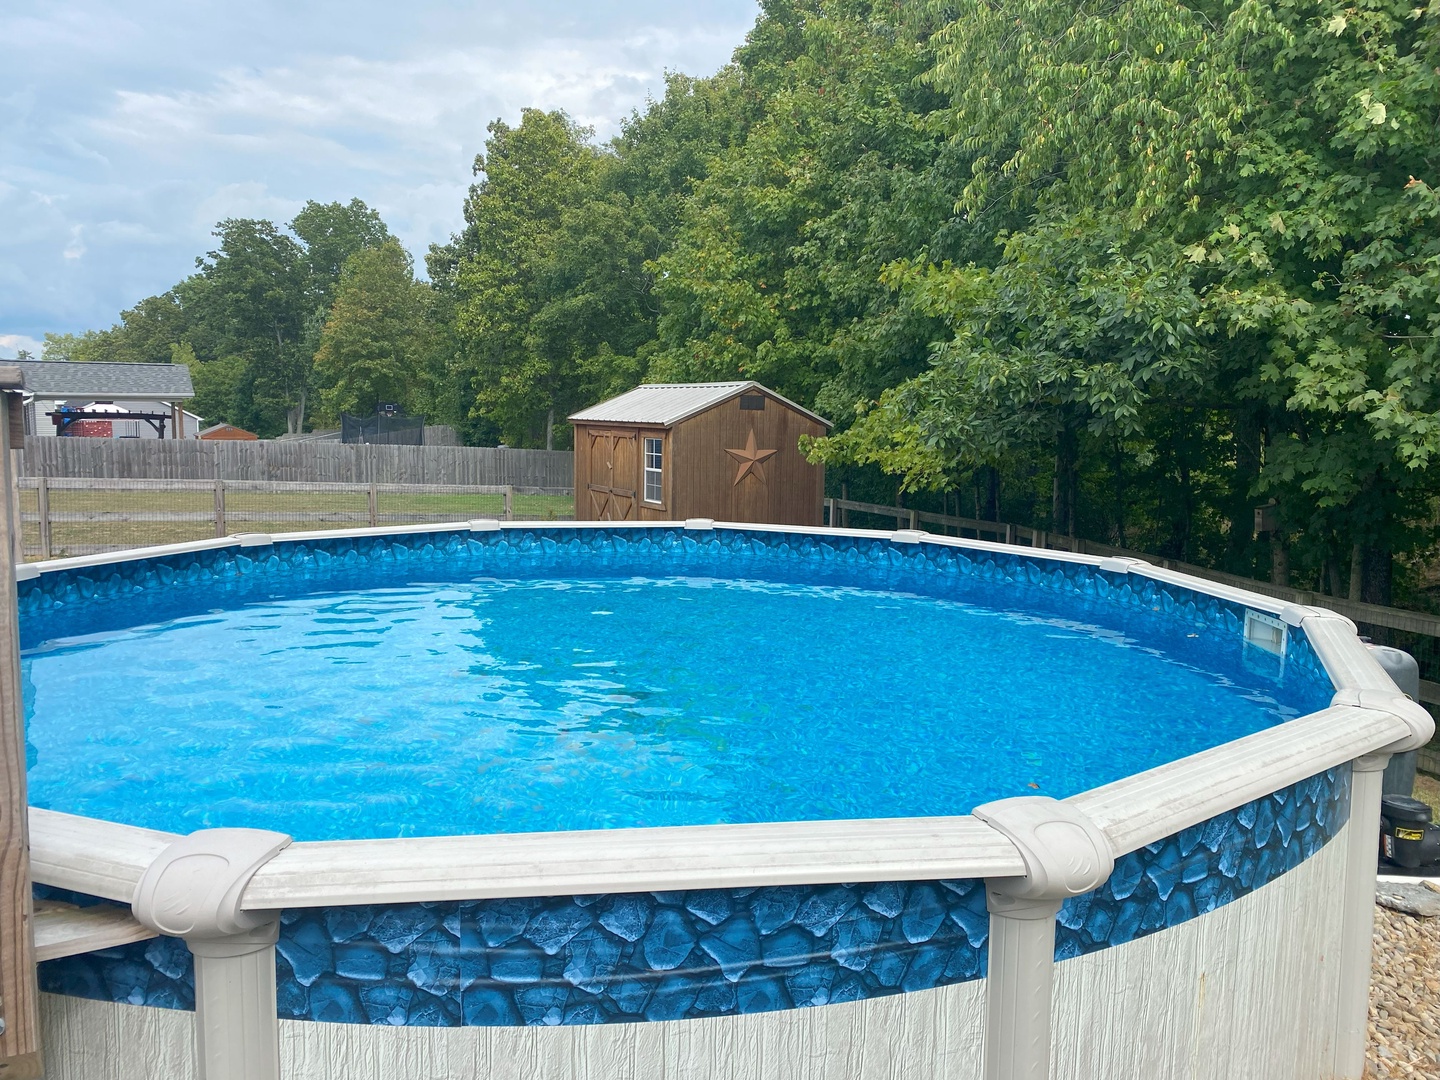 Make a splash out back in the seasonally-available pool!